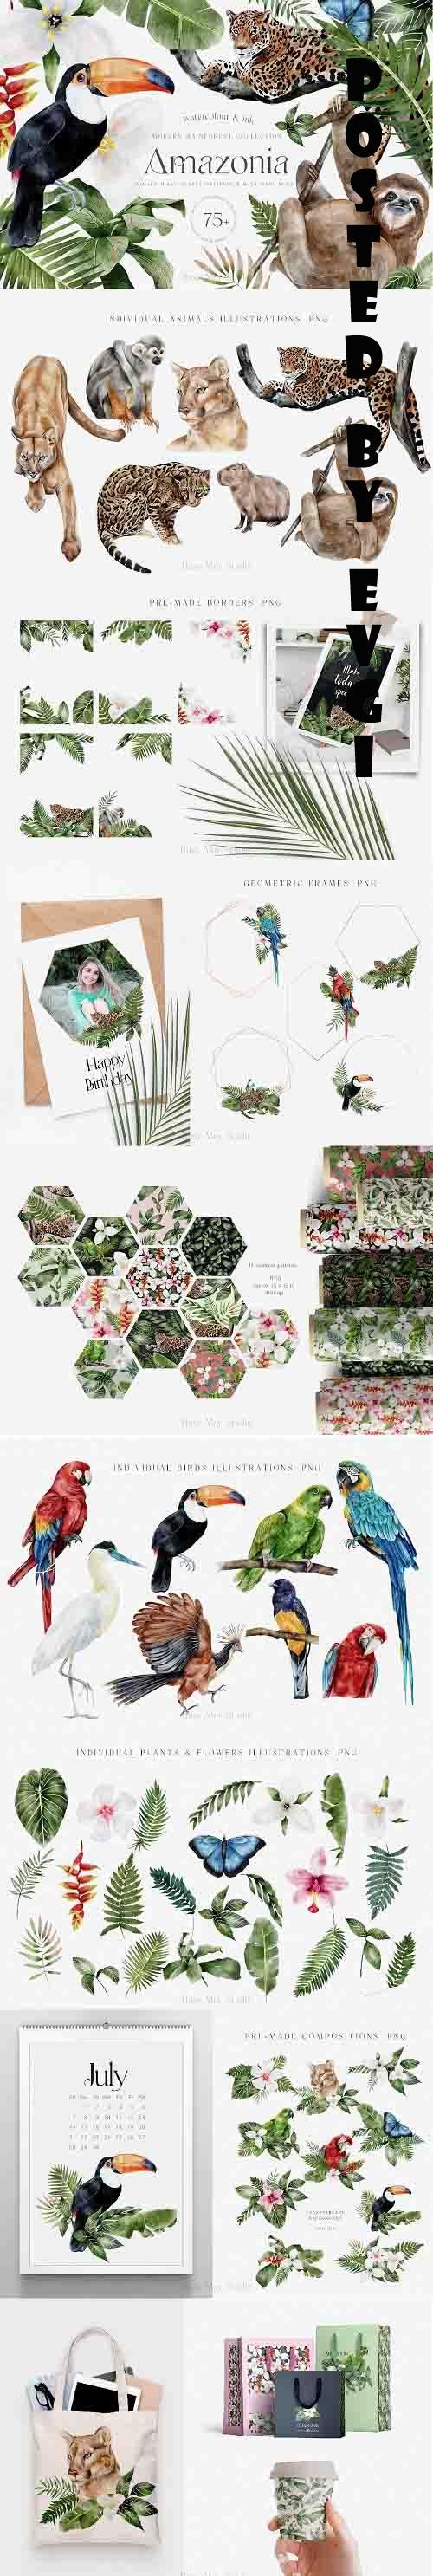 Tropical Rainforest Illustrations Collection and Patterns - 1408970